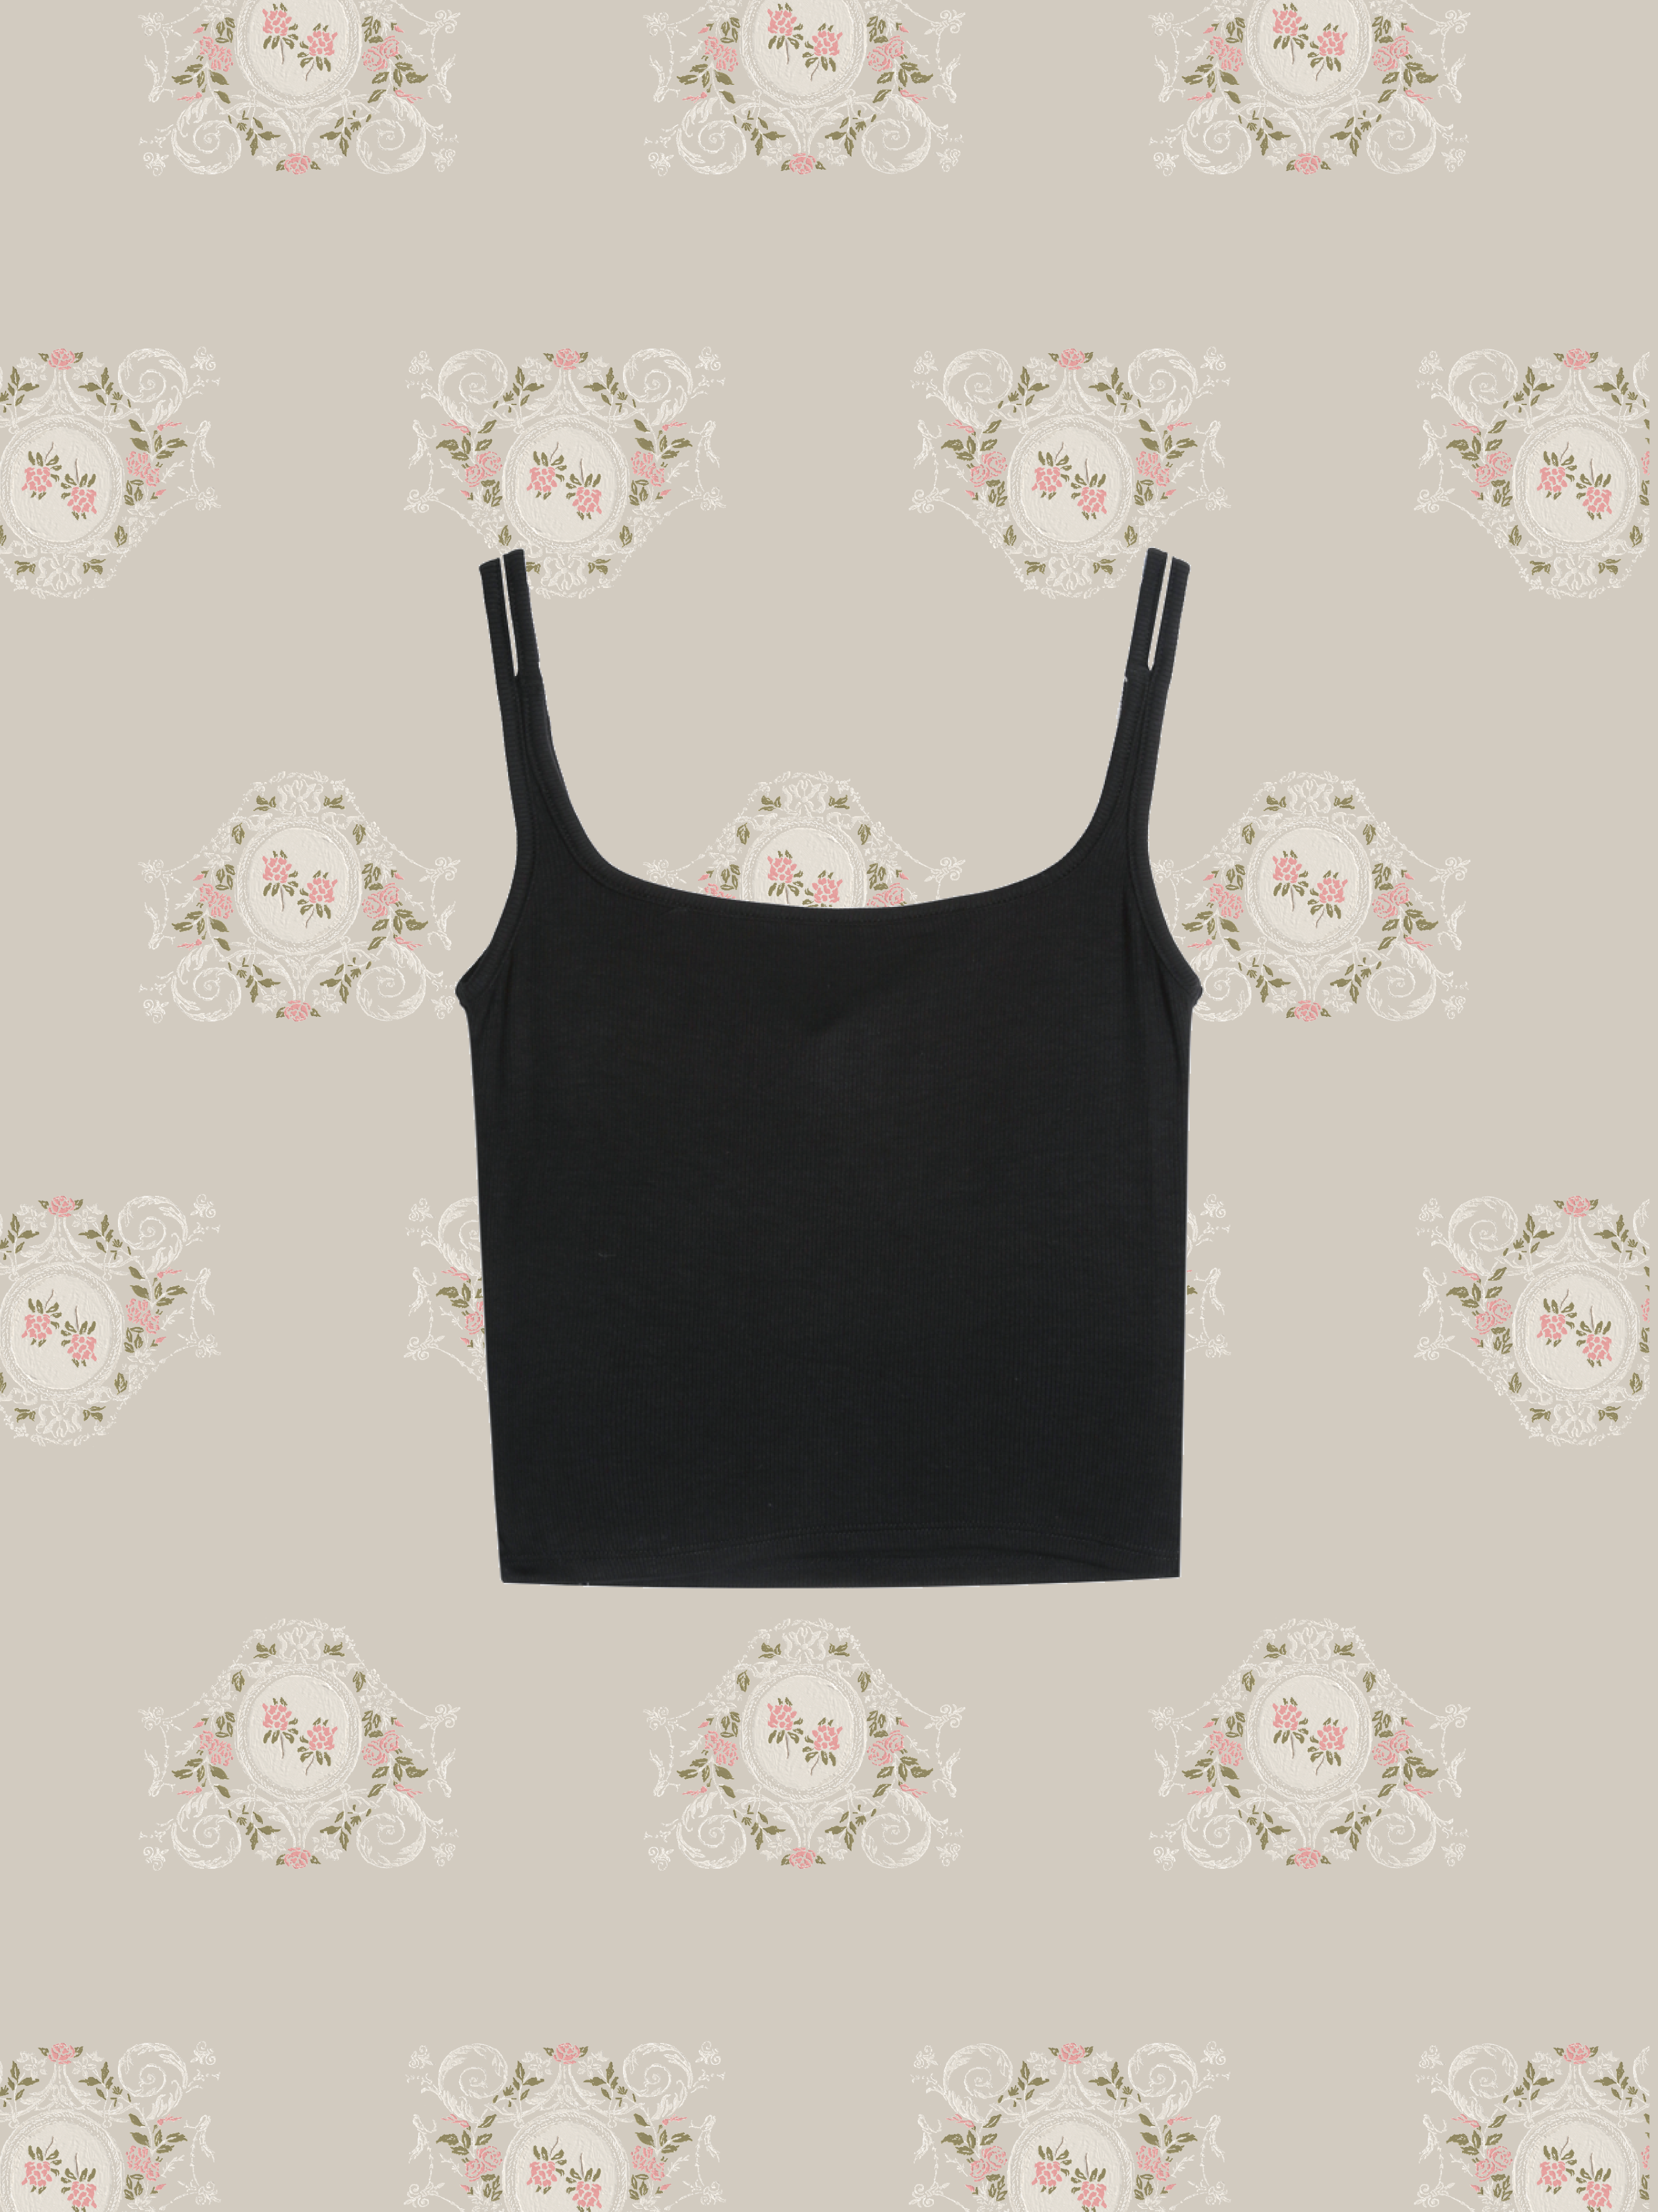 Cup In Sheer Cami/ブラ付きコットンキャミ